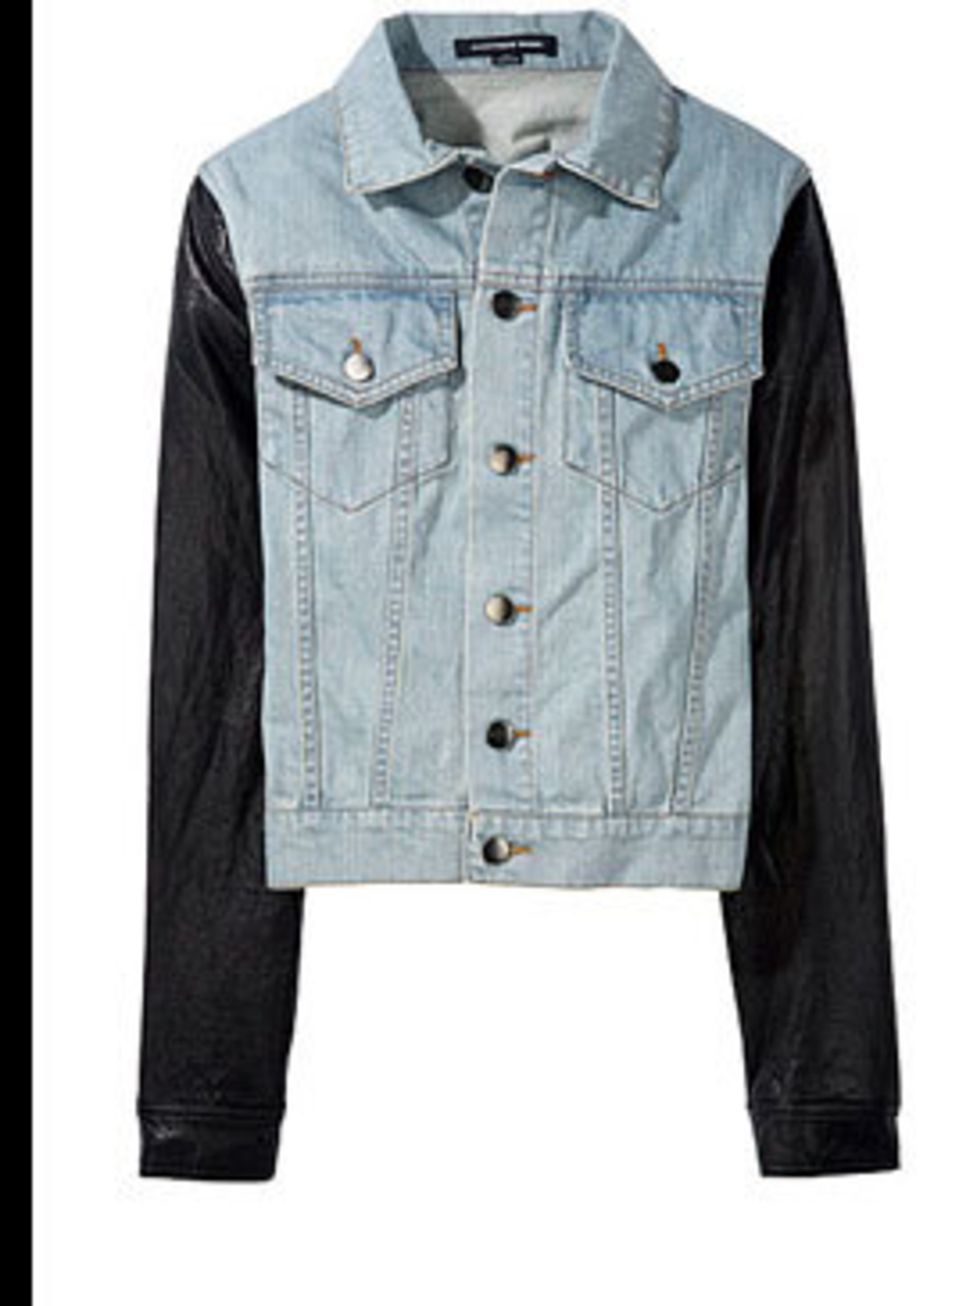 <p>Denim and leather jacket, £352, by Alexander Wang at <a href="http://www.lagarconne.com/store/item.htm?itemid=4863&amp;sid=274&amp;pid=124">La Garconne</a></p>